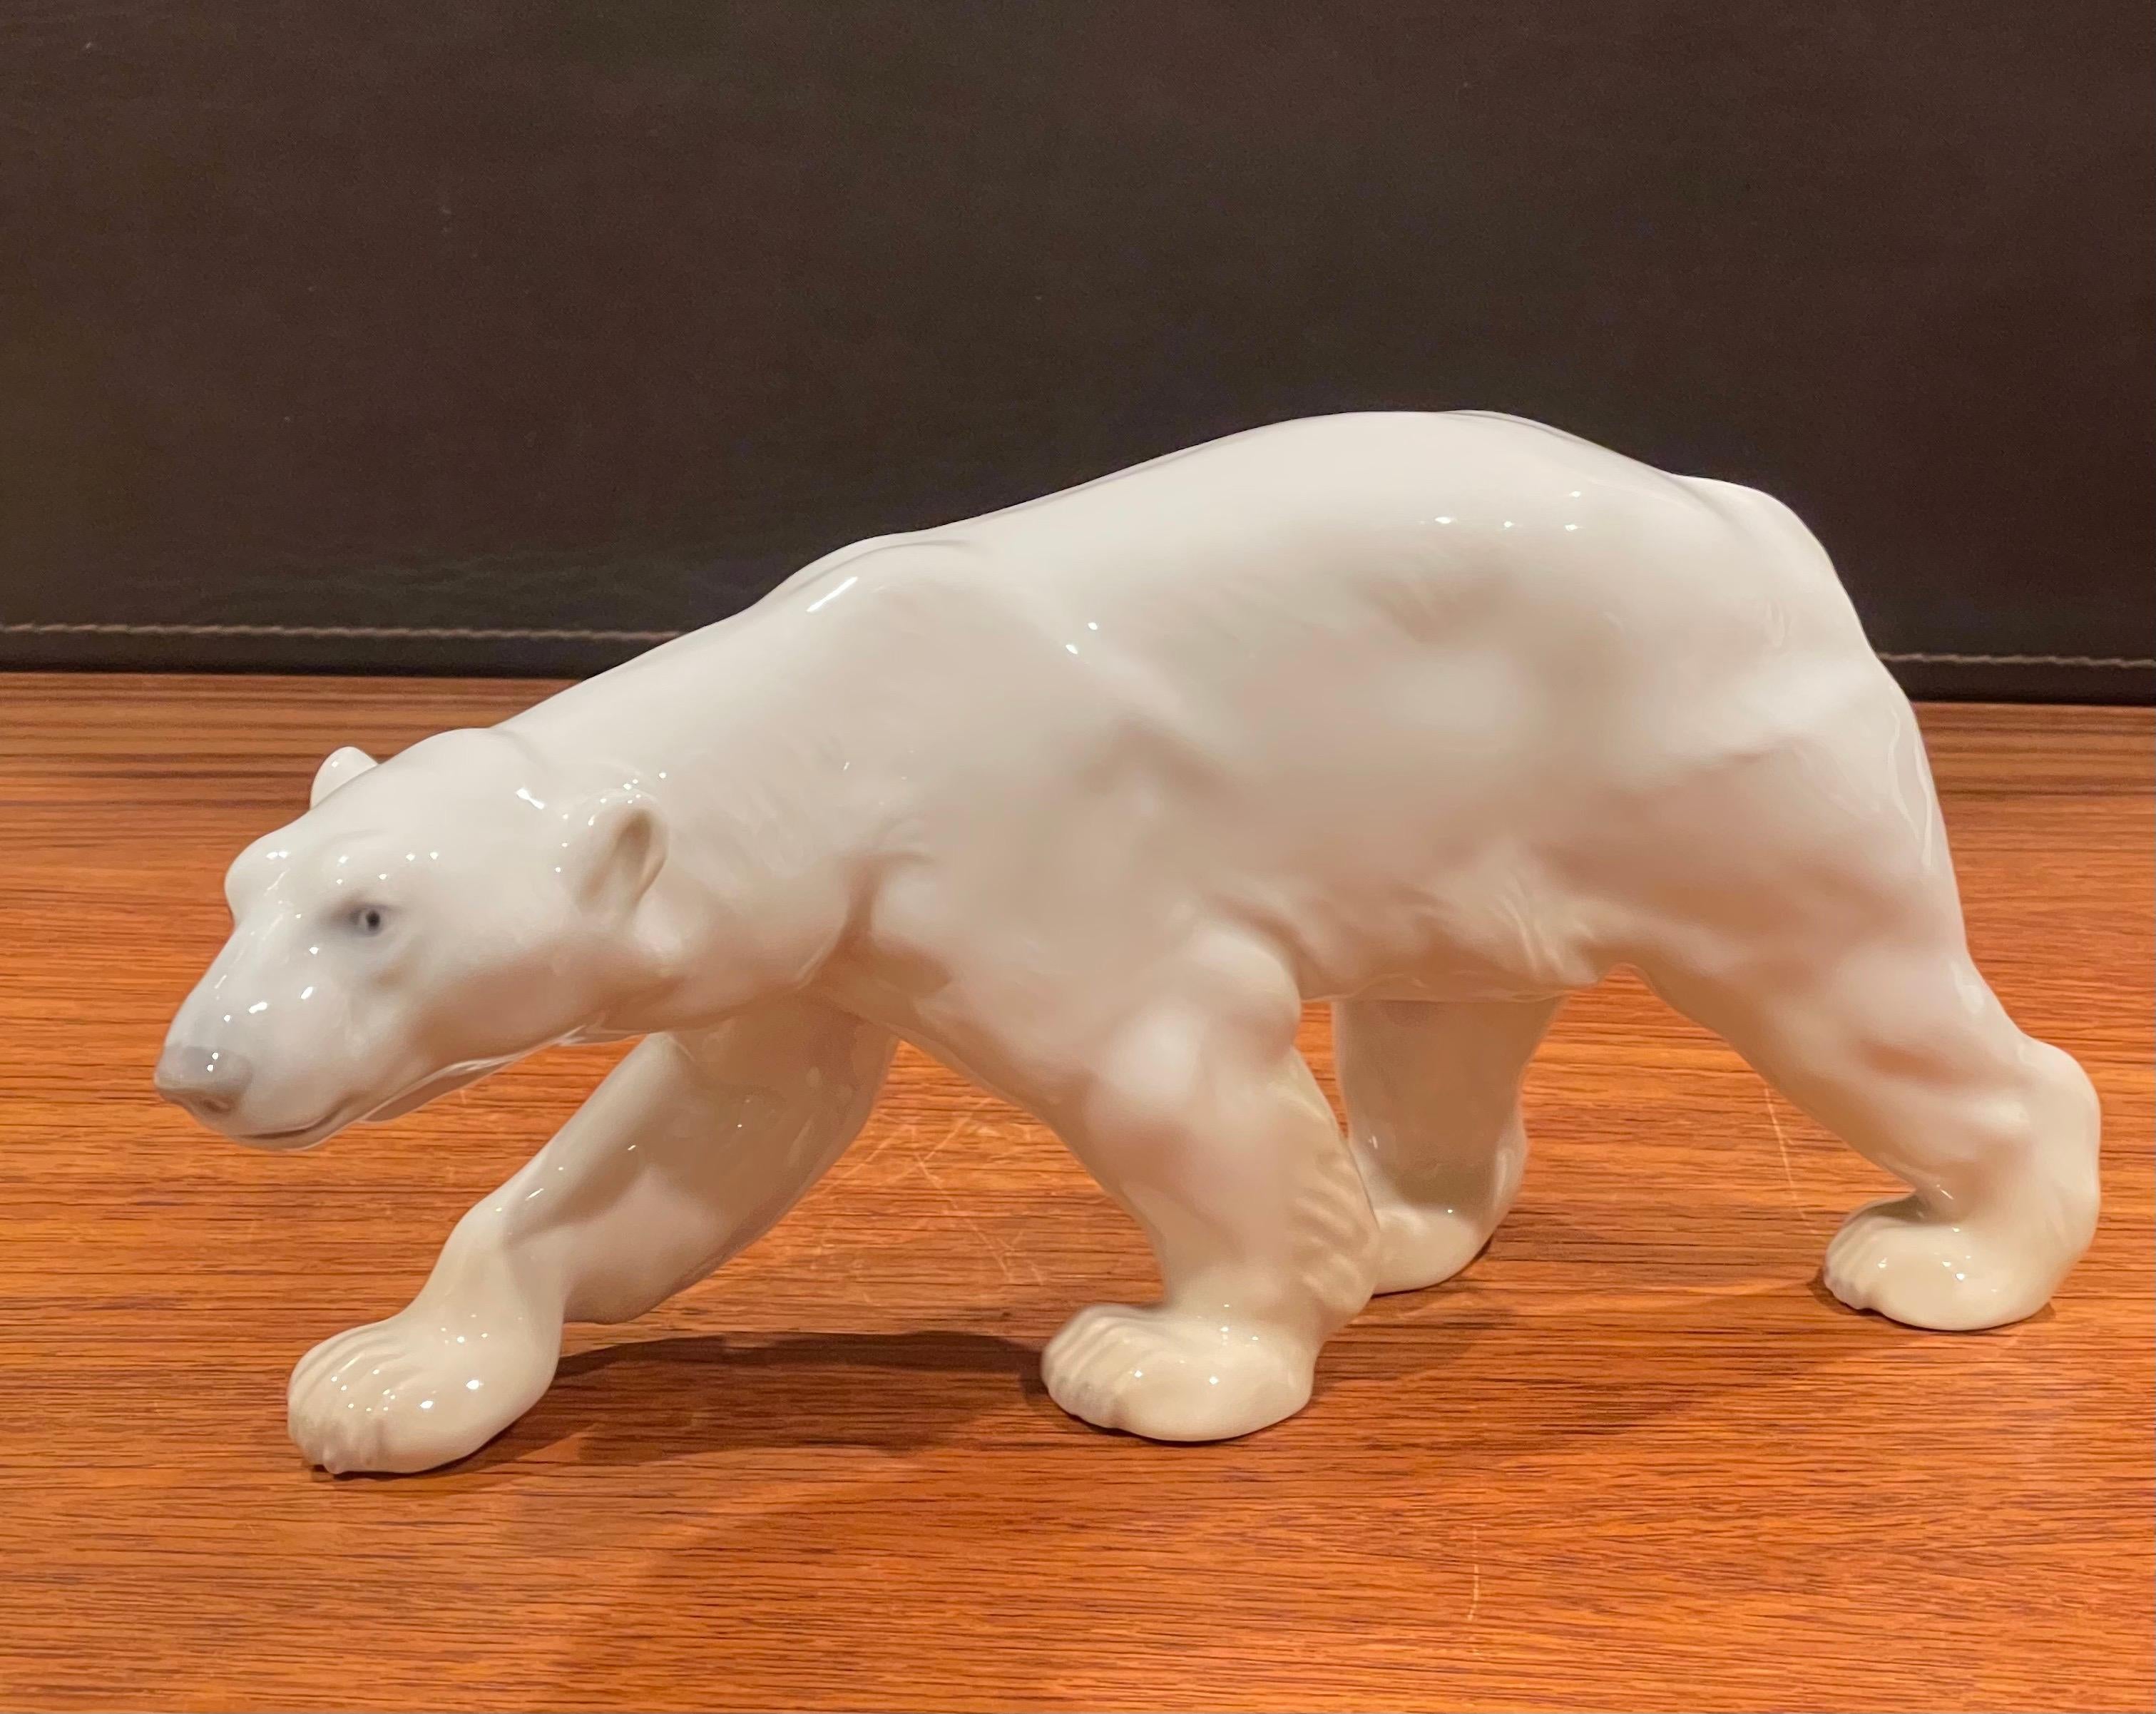 A very nice hand painted porcelain polar bear sculpture by Bing & Grondahl of Denmark, circa 1970s. The piece is in very good vintage condition with no chips or crcks and measures a substantial 12